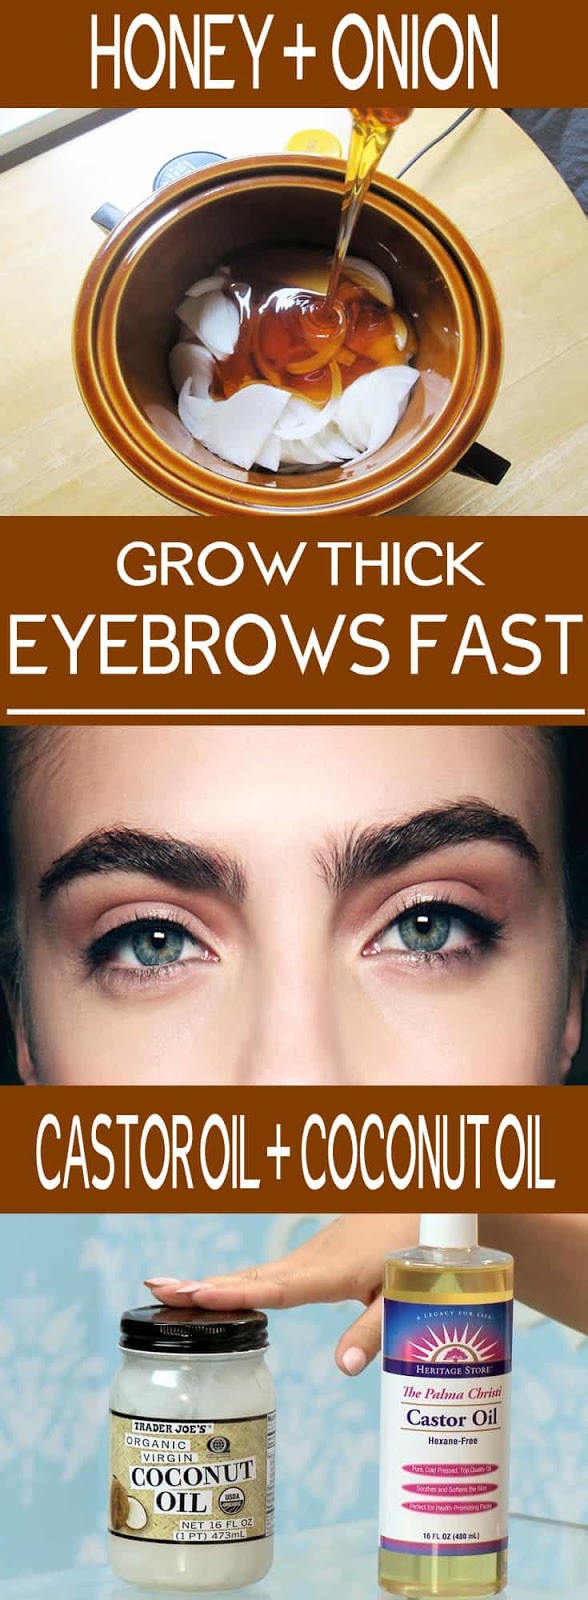 How To Grow Thicker Eyebrows Best Home Remedies - Natural ...